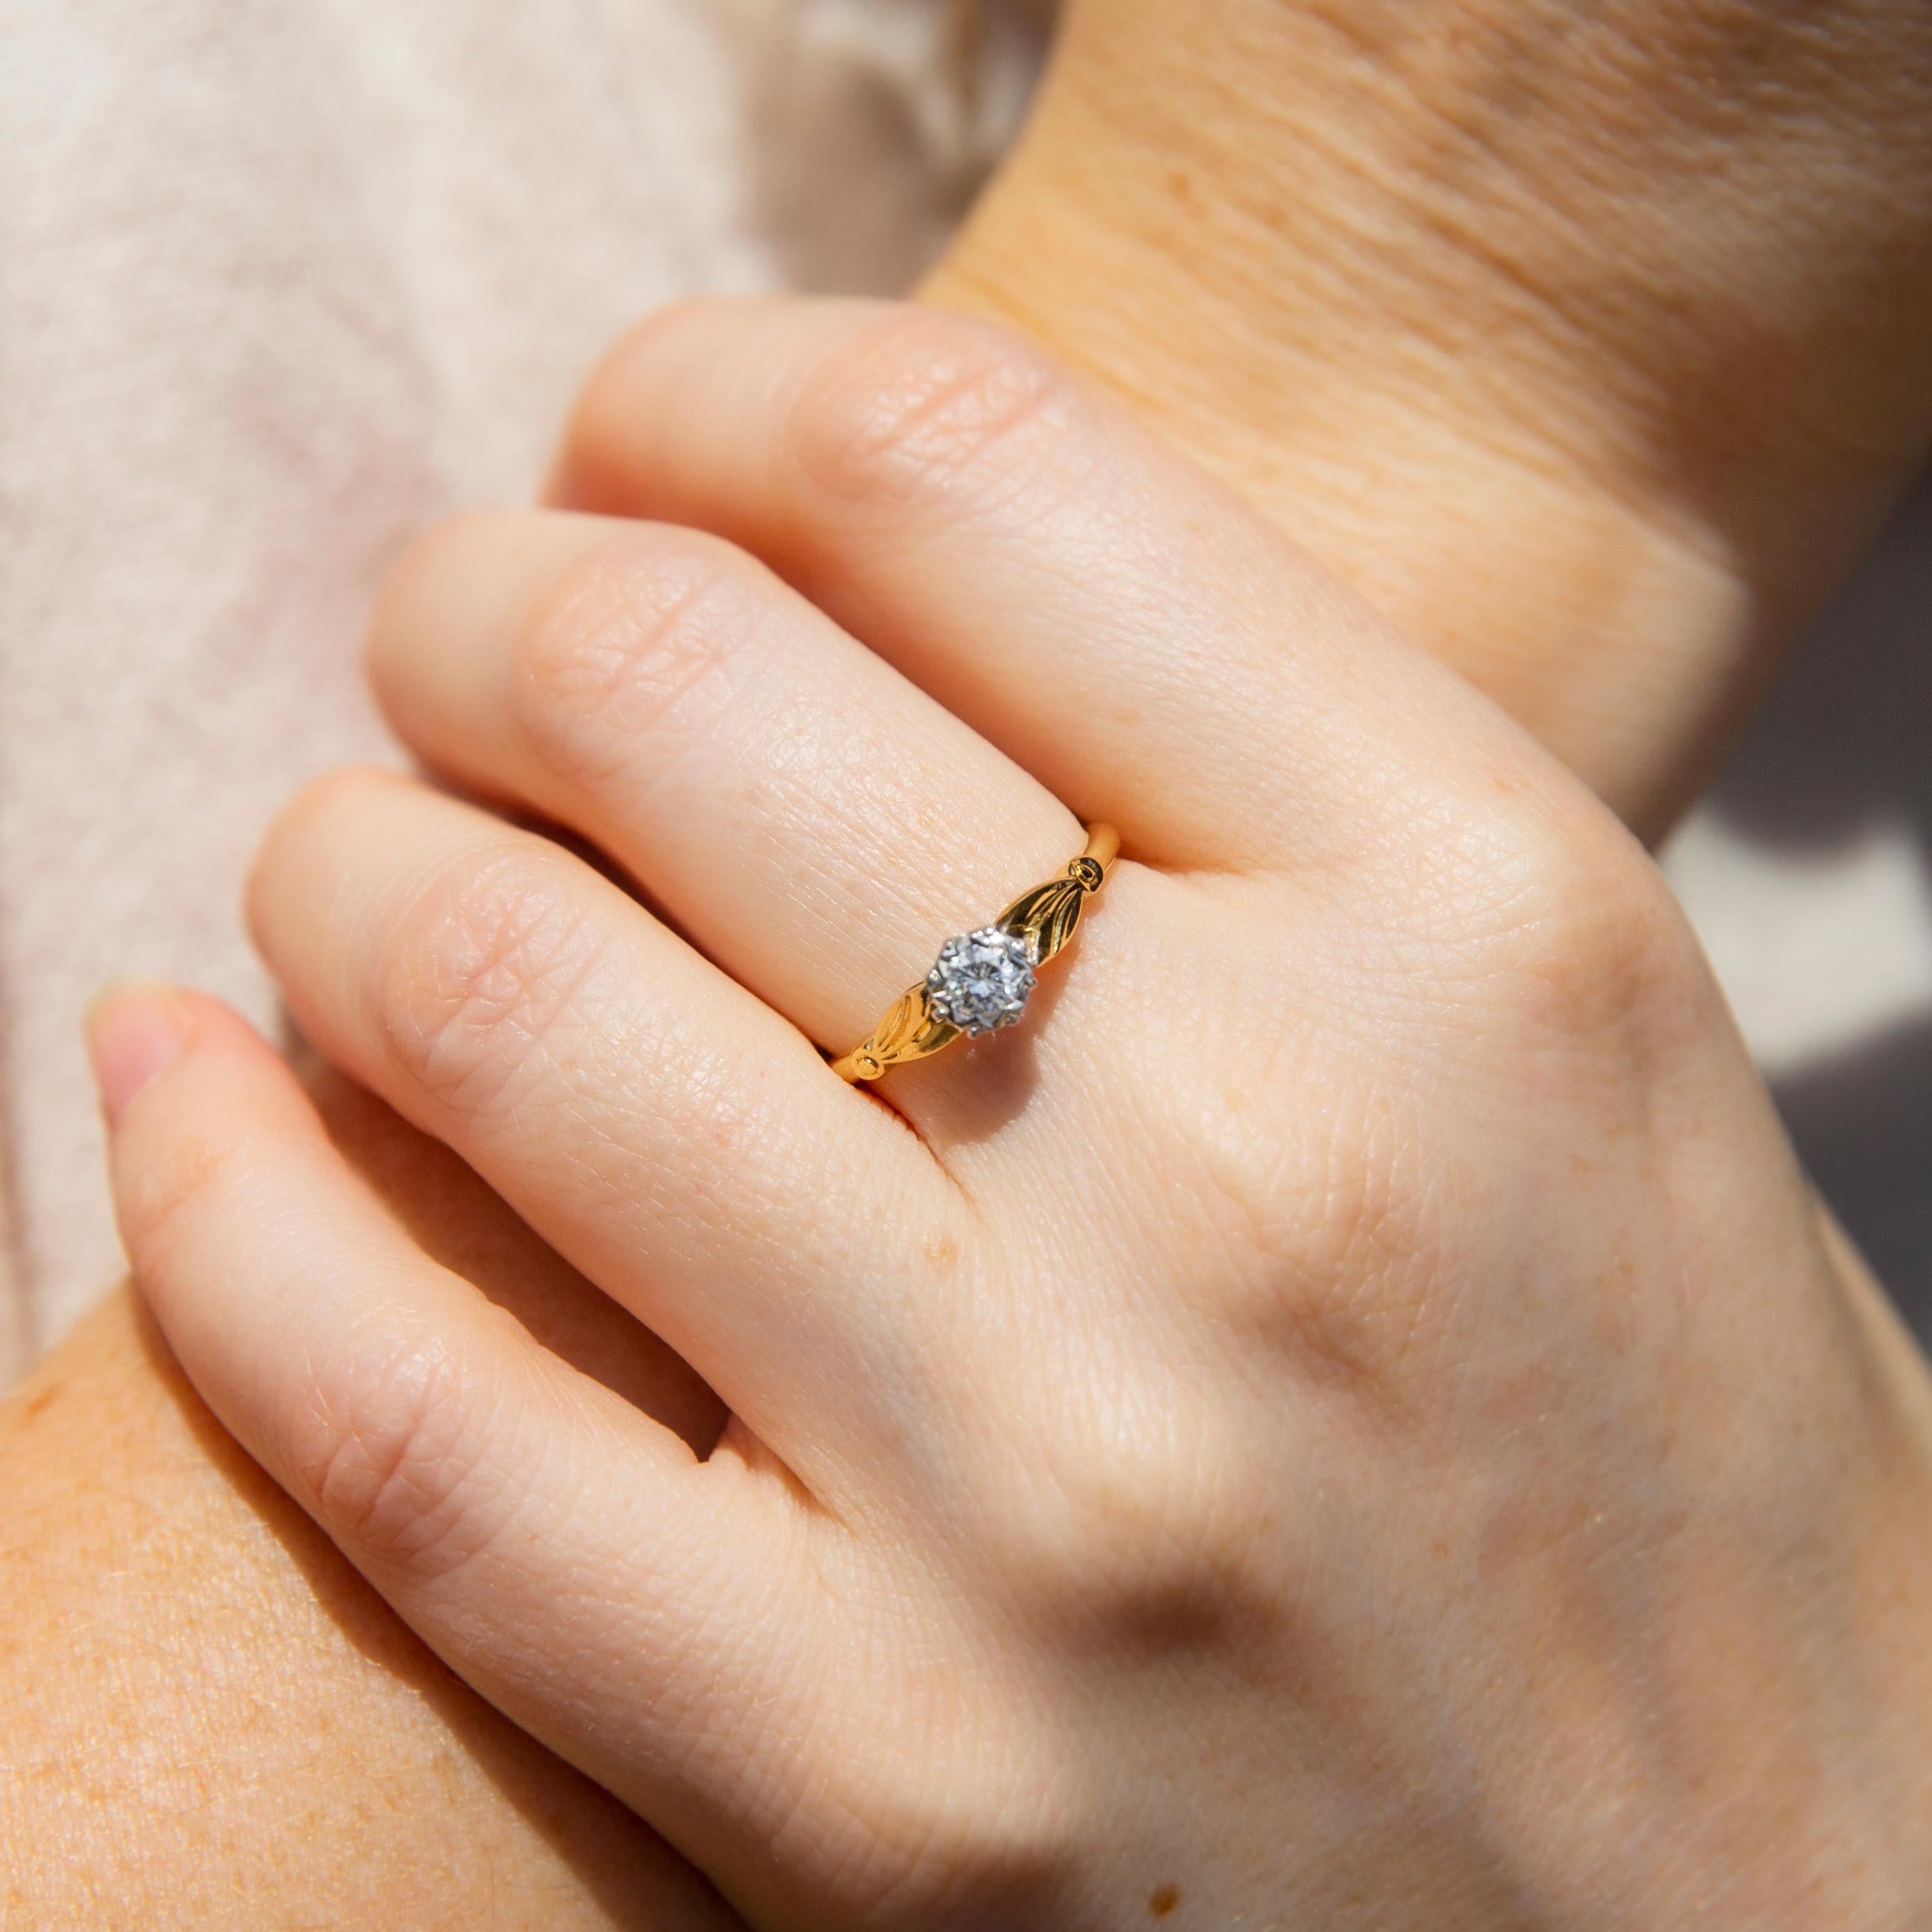 Lovingly crafted in 18 carat gold, The Anita Ring is a vintage enchantment. Her band reaches up on leaf-like shoulders to present a diamond cradled in white gold. A sweet promise.

The Anita Ring Gem Details 
The round brilliant cut diamond is